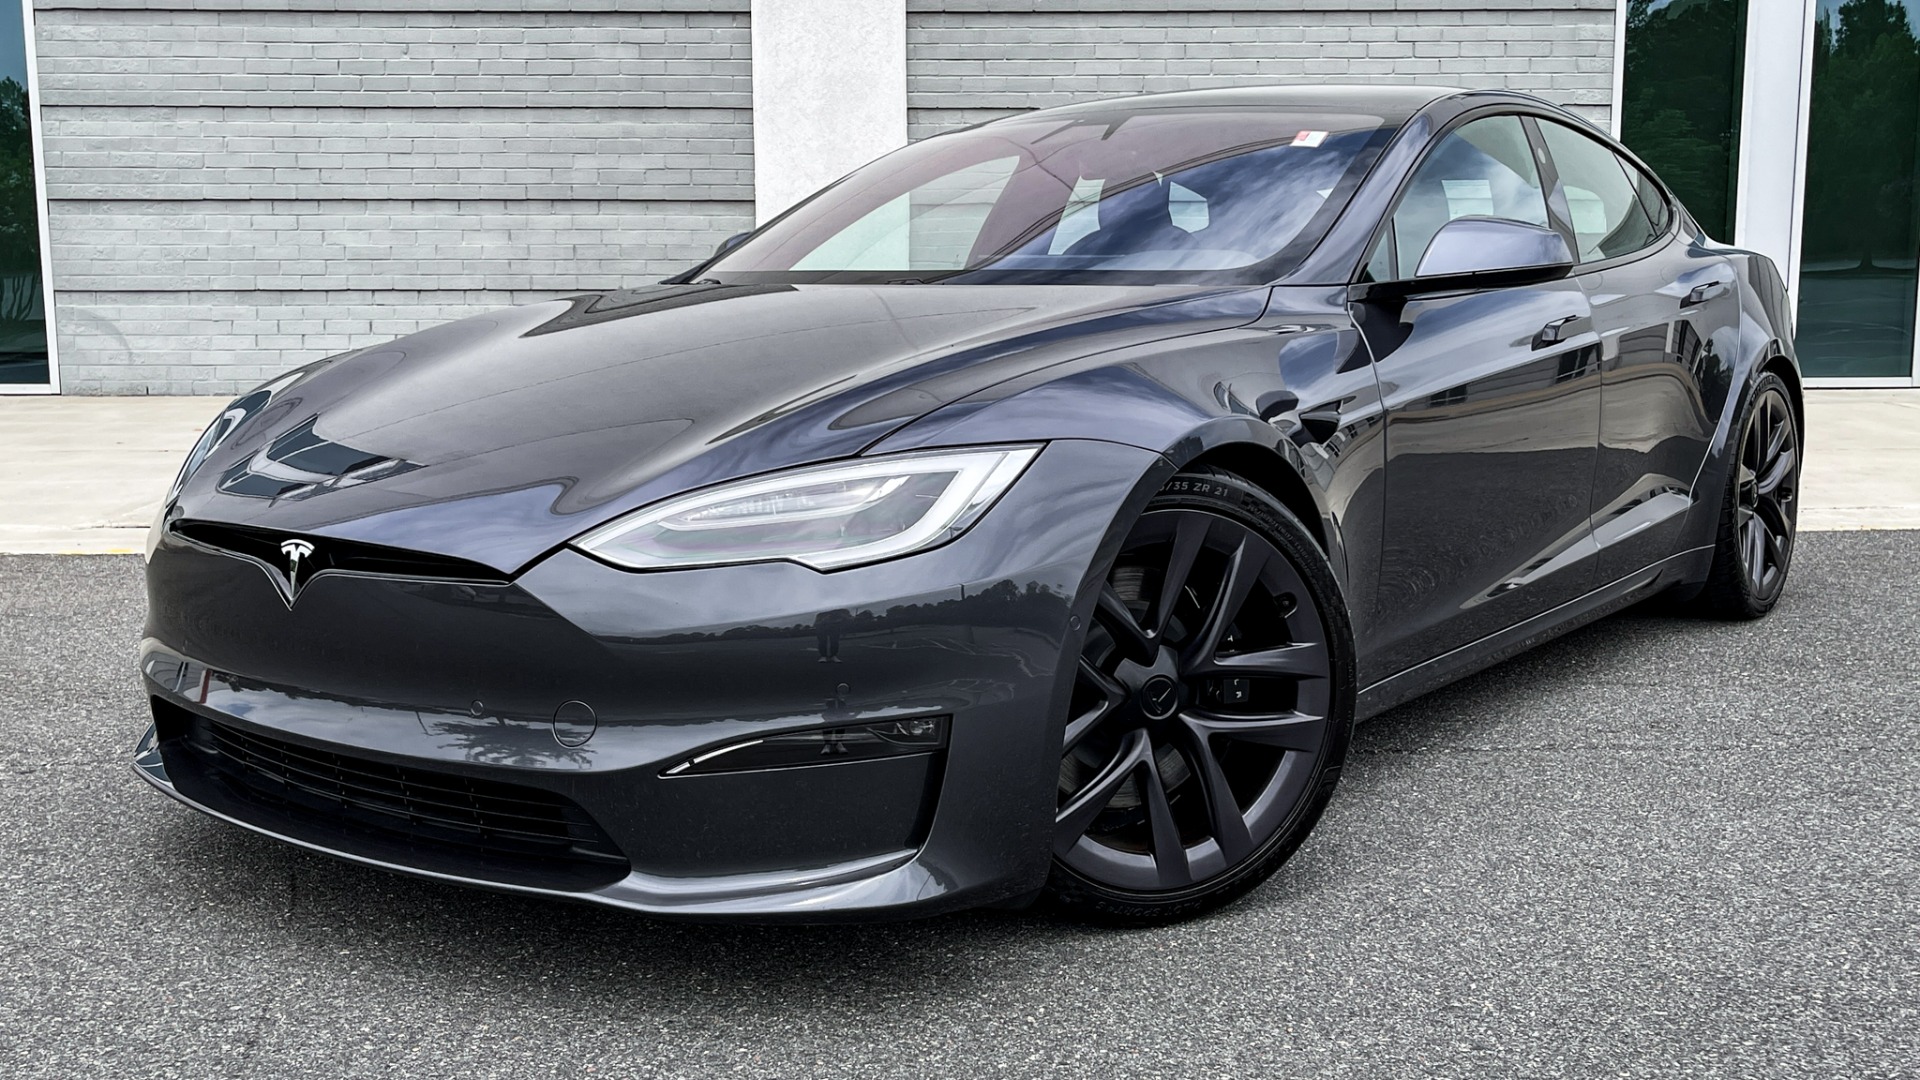 Used 2021 Tesla Model S Plaid / FULL SELF DRIVING / 21IN WHEELS / CARBON FIBER TRIM / PREMIUM CONNE for sale $134,000 at Formula Imports in Charlotte NC 28227 1